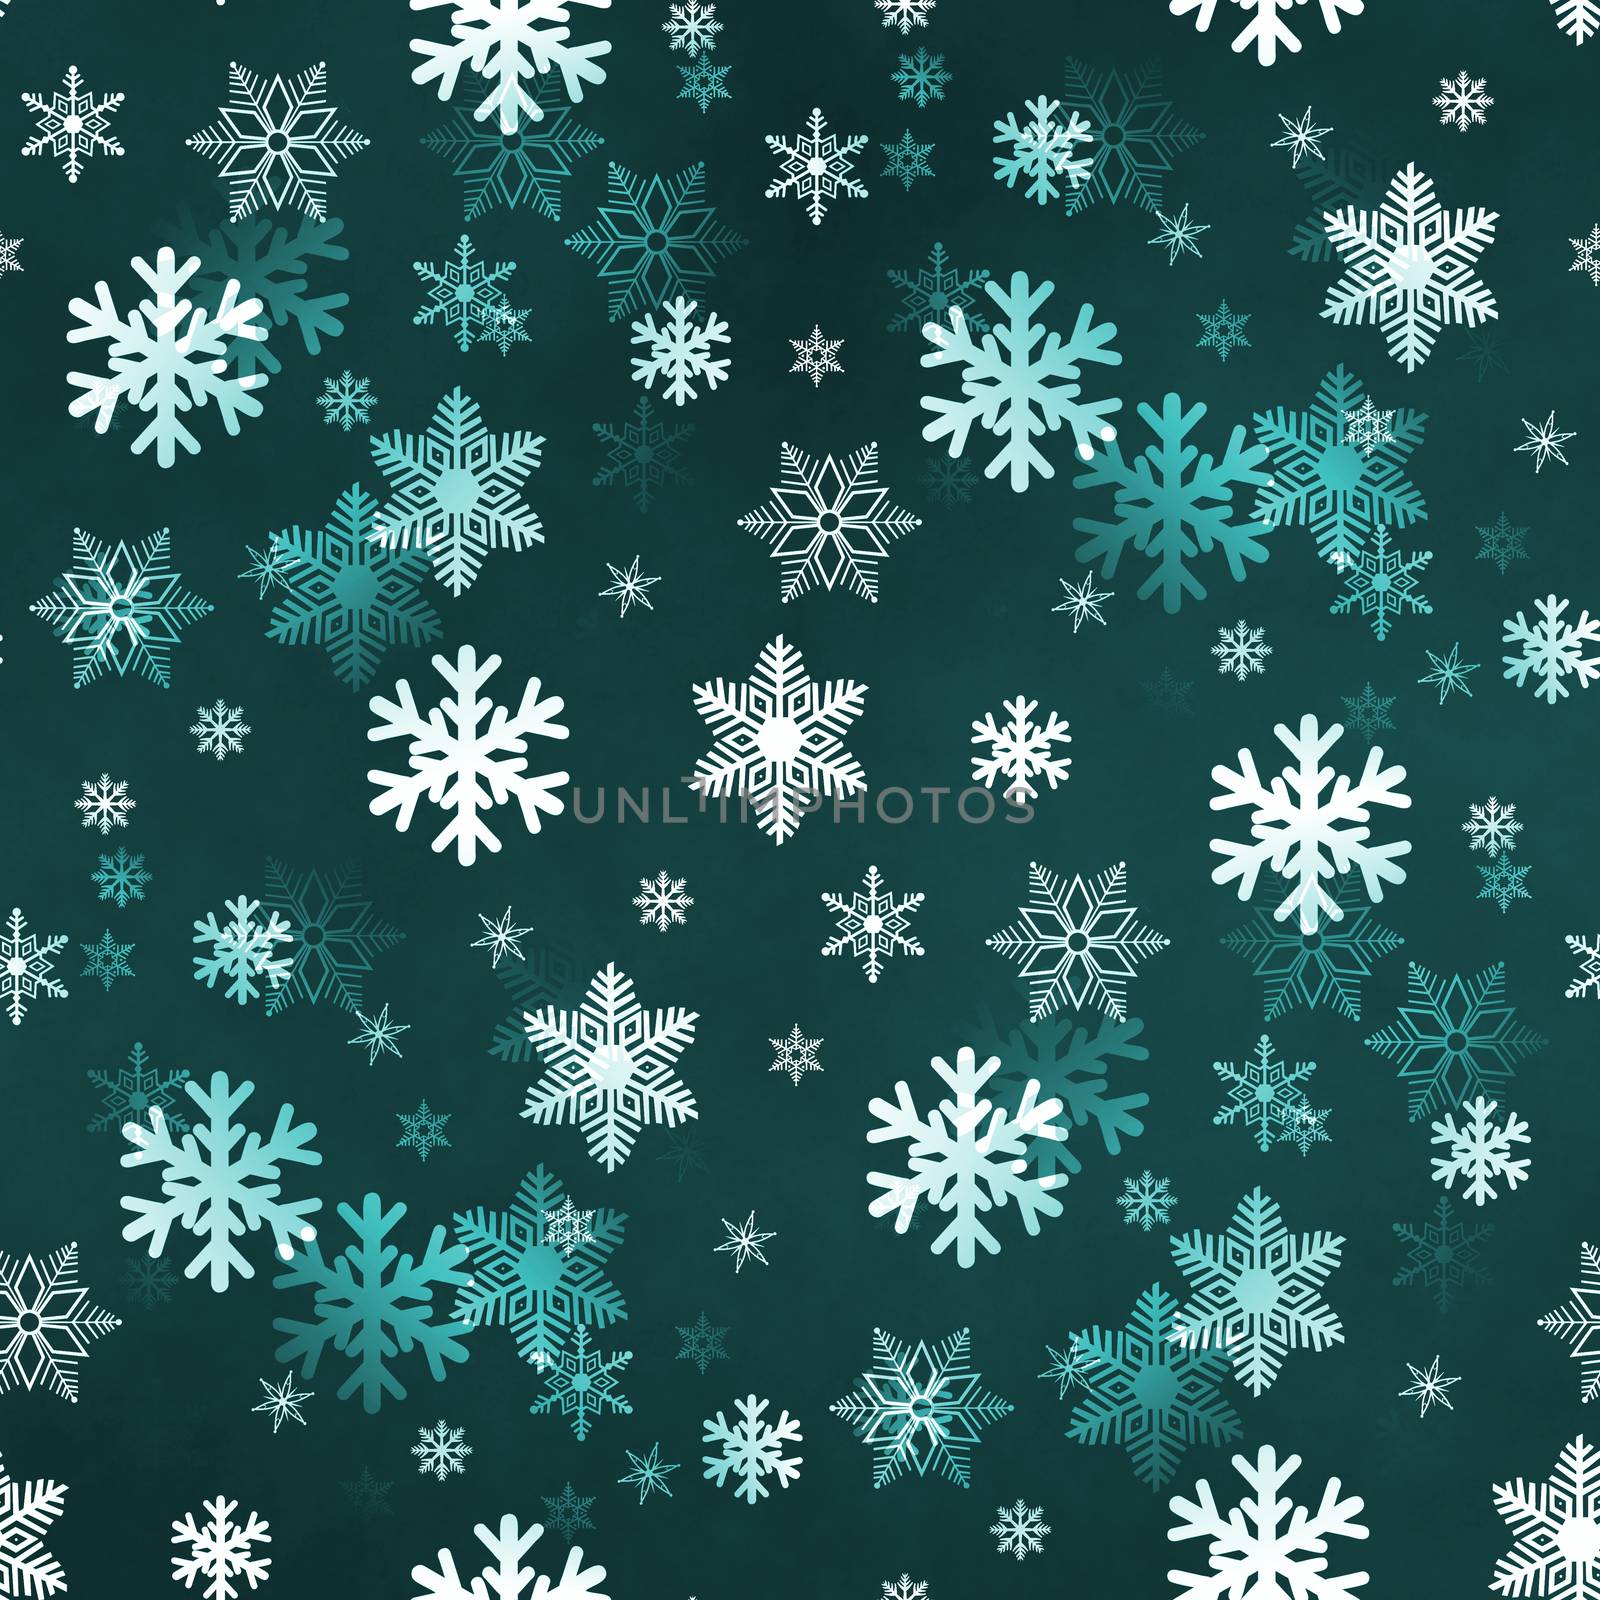 Dark green winter Christmas snowflakes with a seamless pattern as background image.